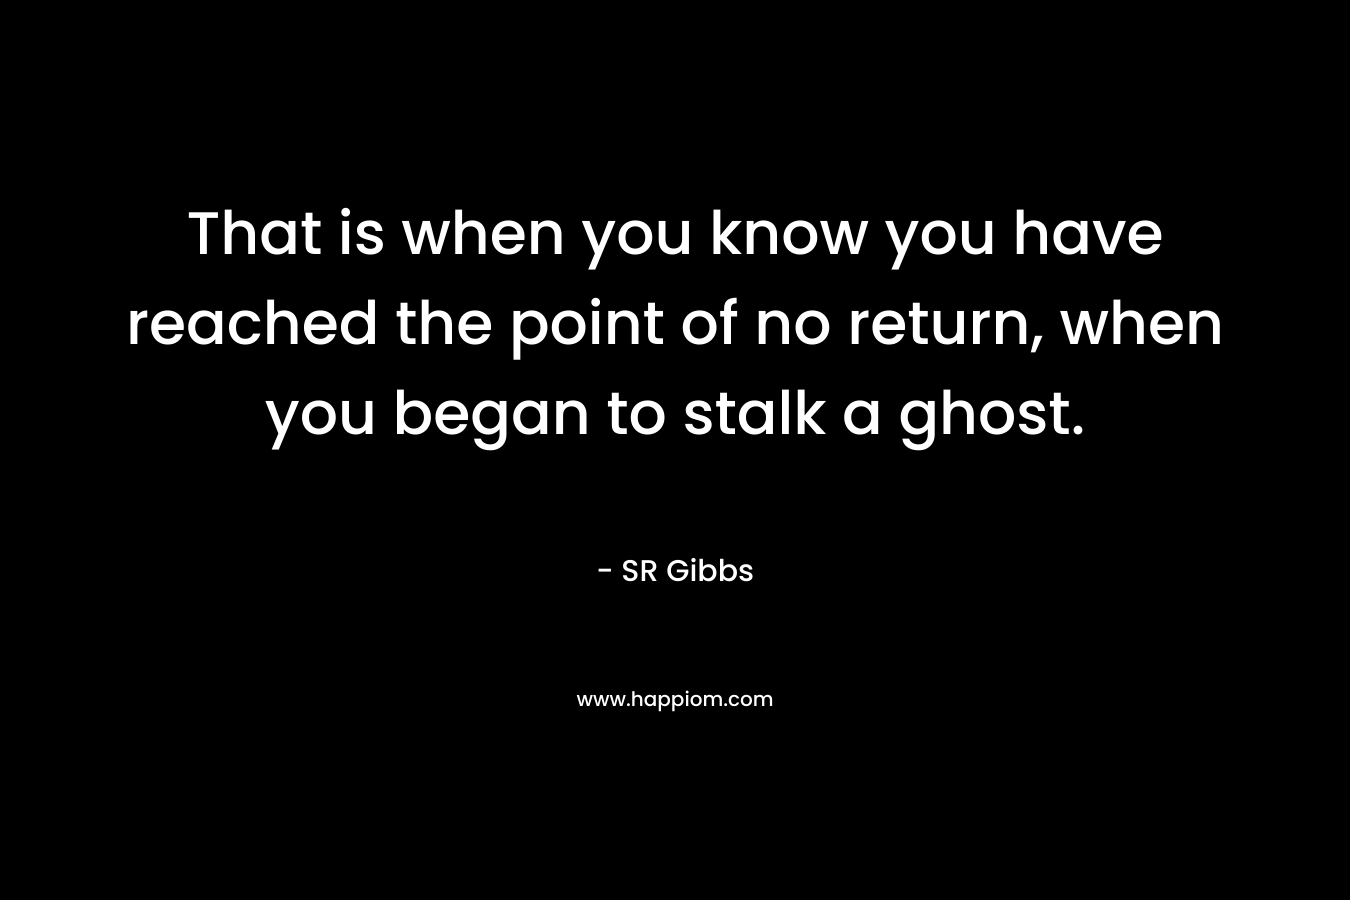 That is when you know you have reached the point of no return, when you began to stalk a ghost. – SR Gibbs